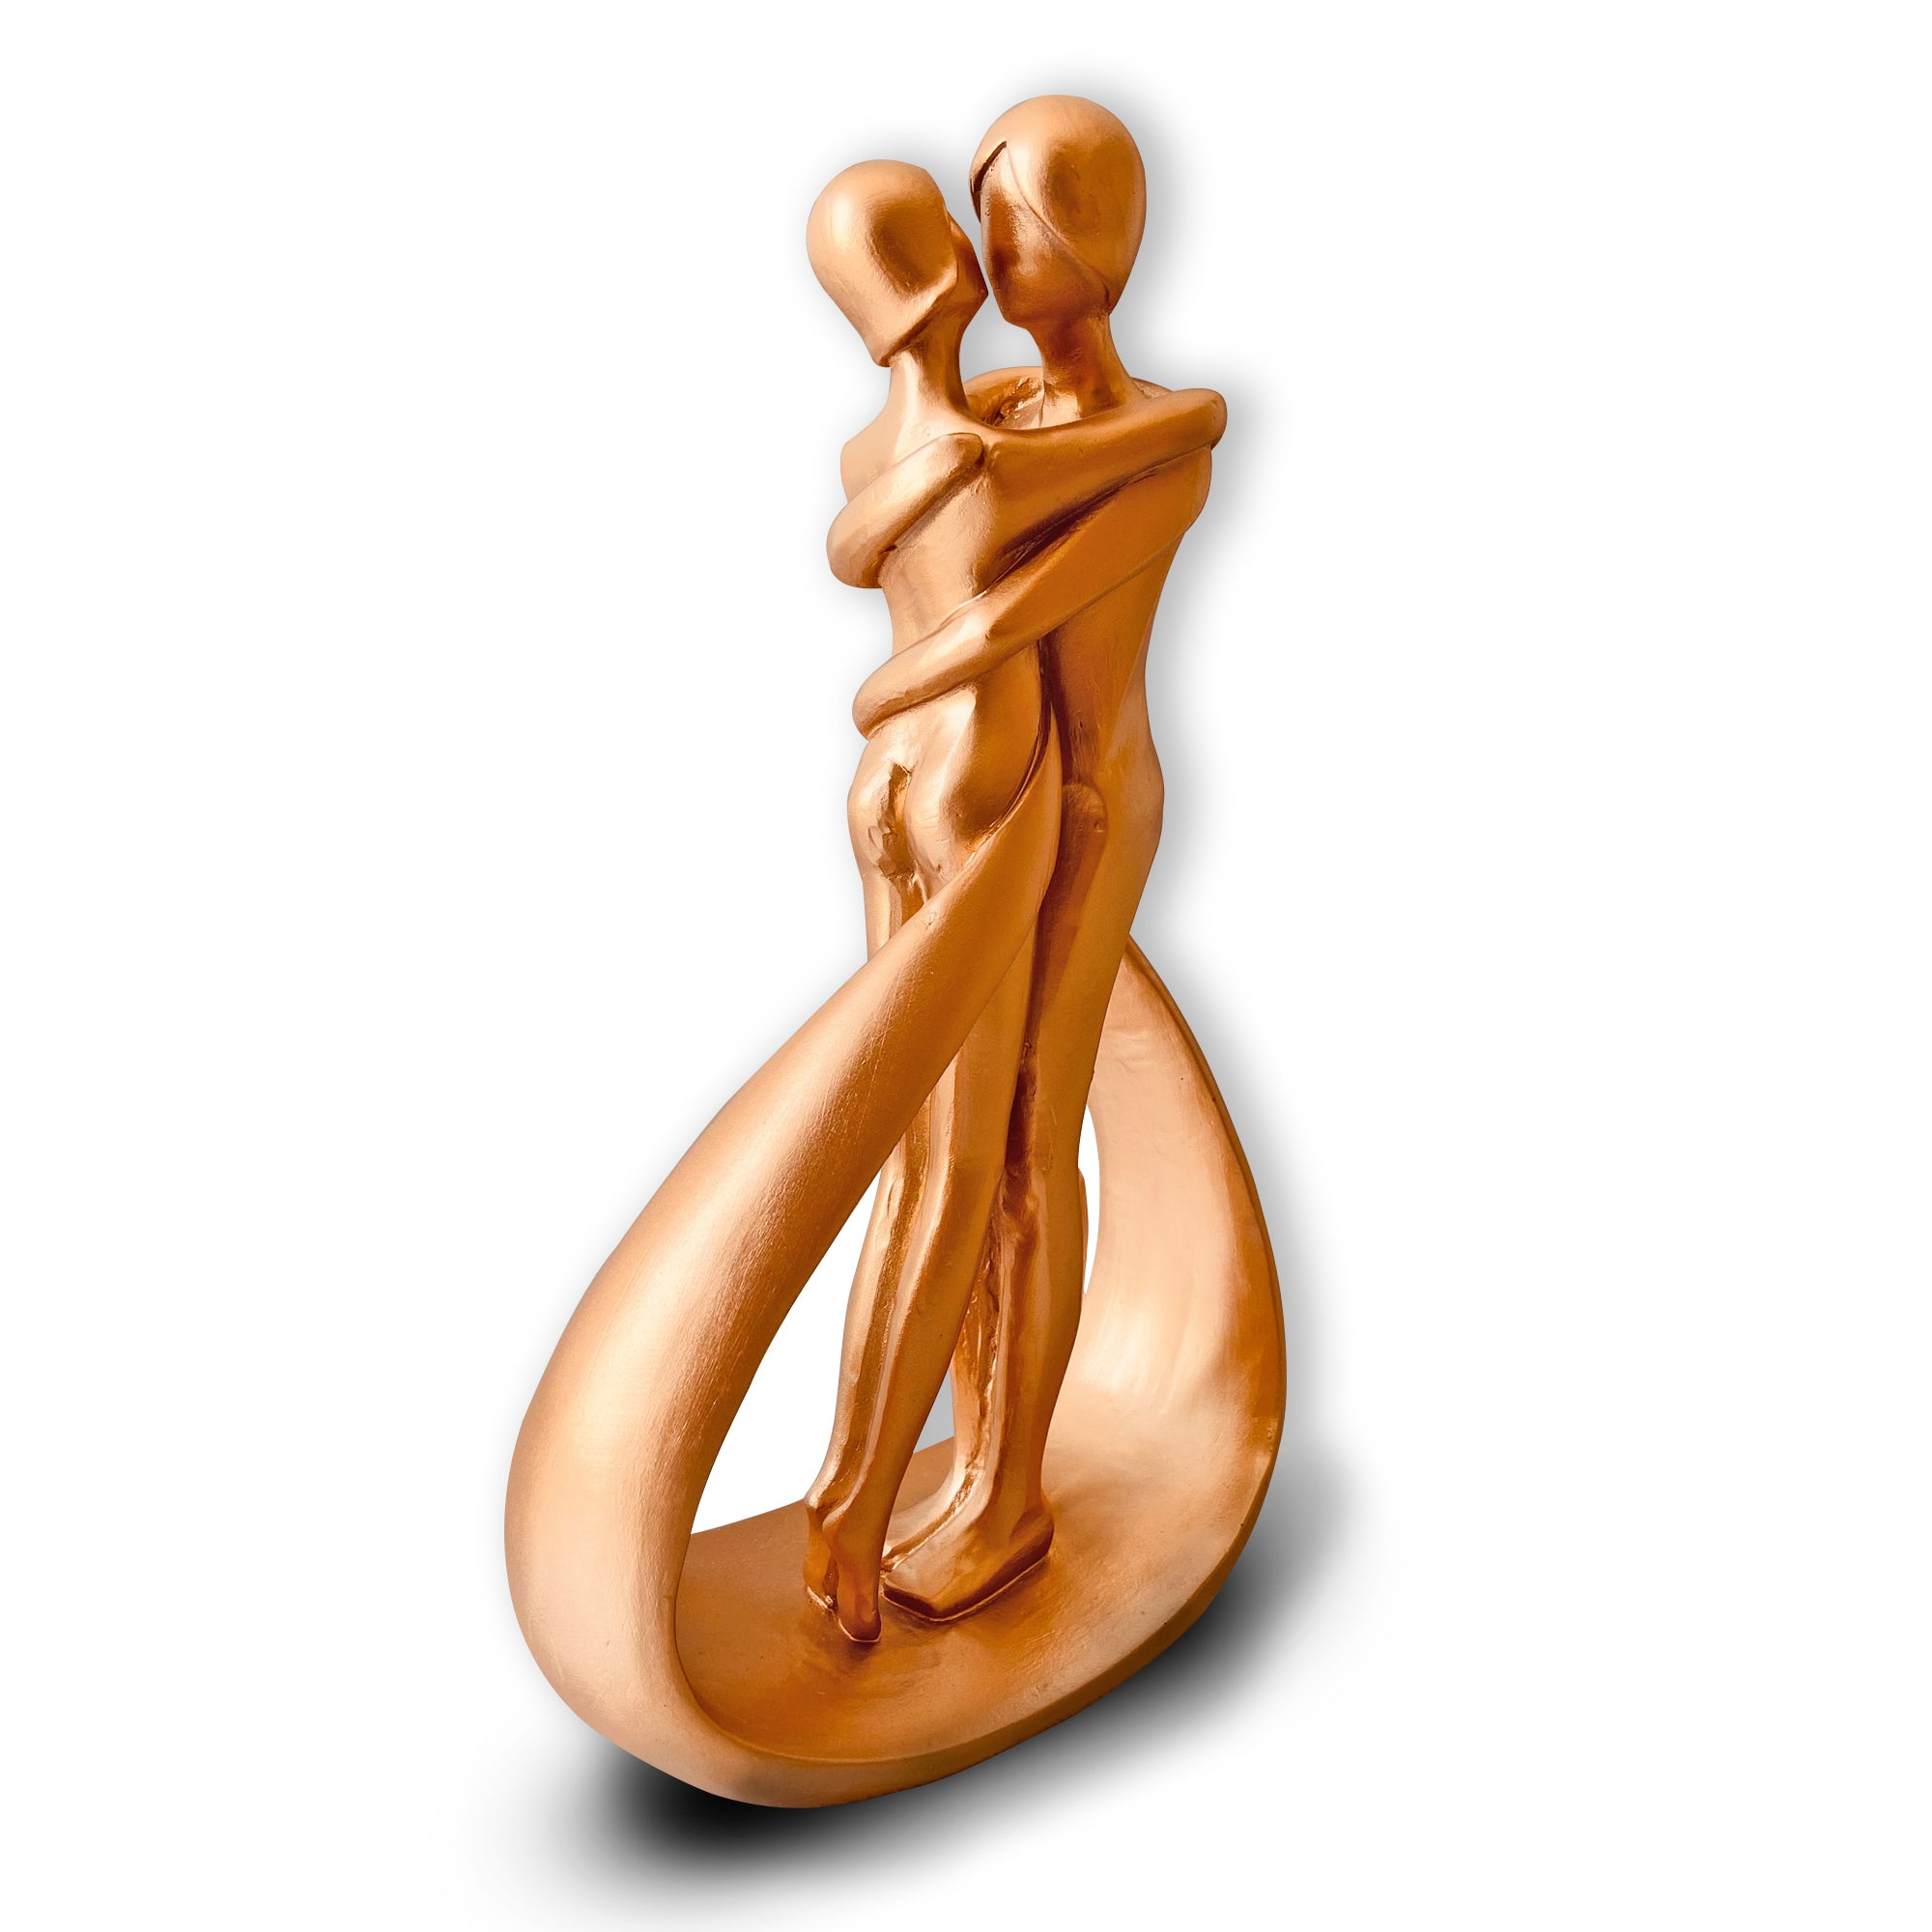 Resin Passionate embrace kiss couple statue abstract Romantic Ornament Figurine Home Decor Engagement Wedding Gift